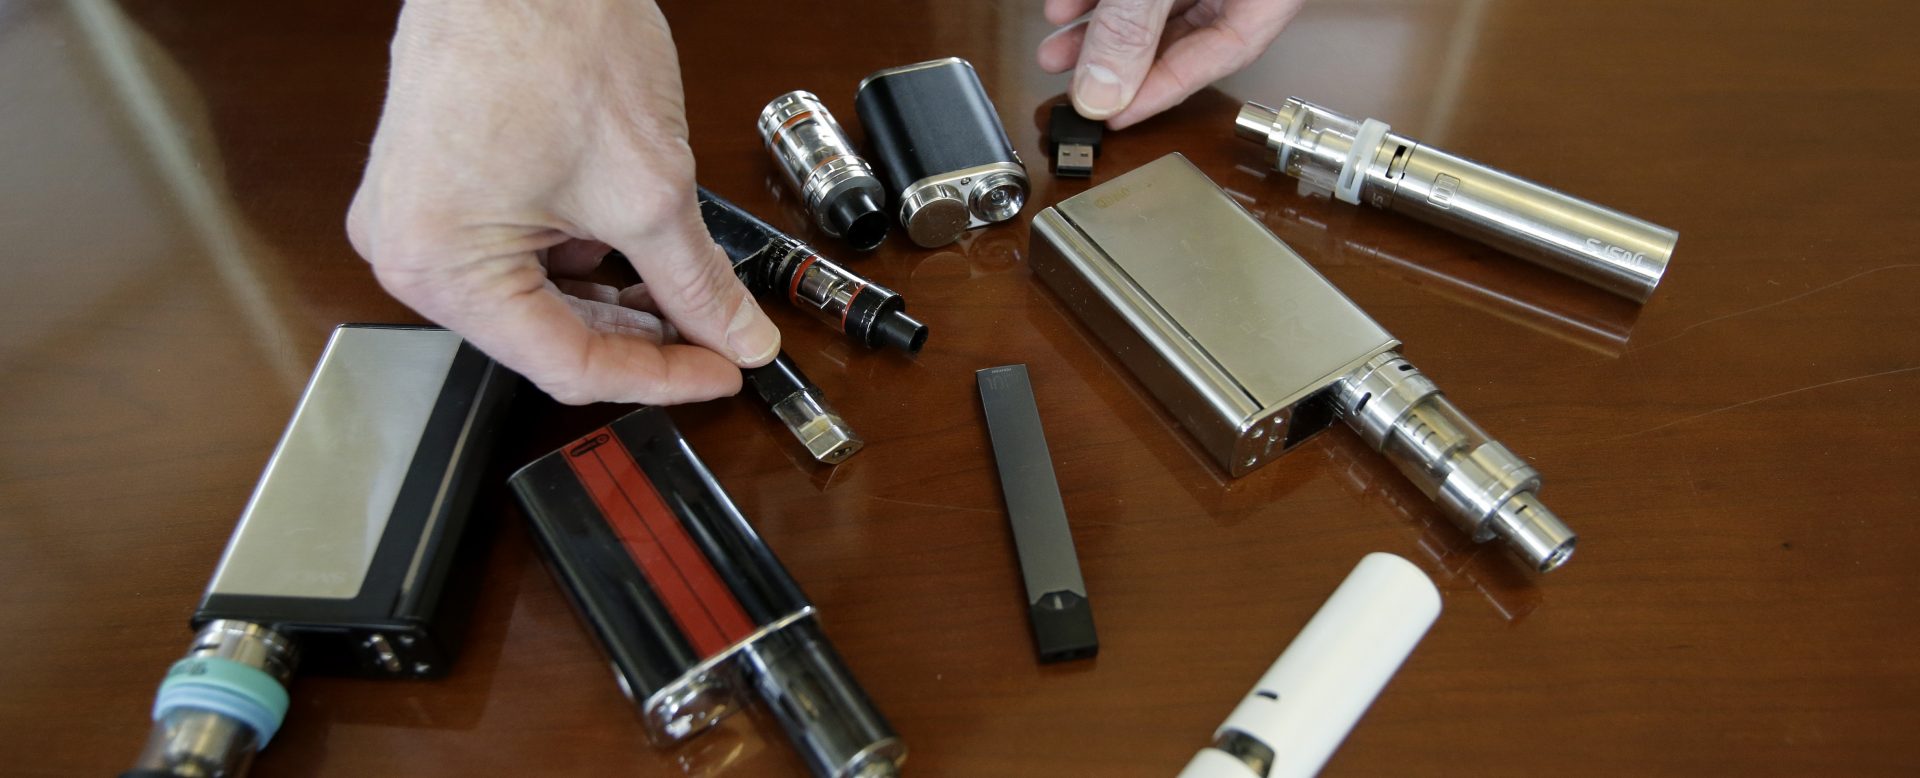 FILE PHOTO: In this Tuesday, April 10, 2018 file photo Marshfield High School Principle Robert Keuther displays vapes that were confiscated from students in Marshfield, Mass.